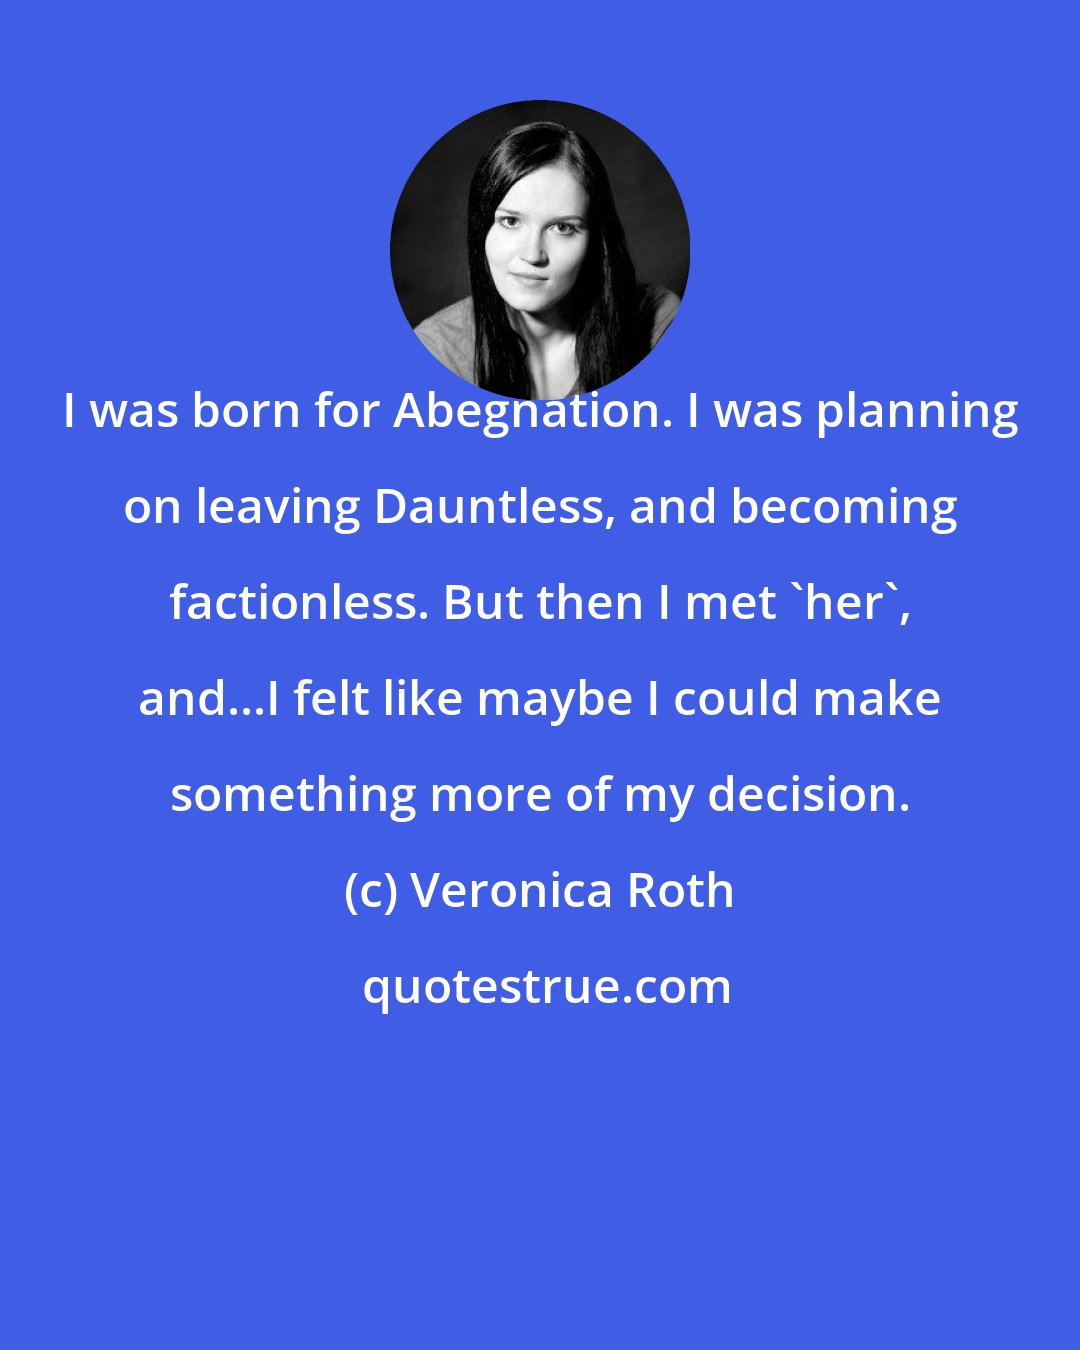 Veronica Roth: I was born for Abegnation. I was planning on leaving Dauntless, and becoming factionless. But then I met 'her', and...I felt like maybe I could make something more of my decision.